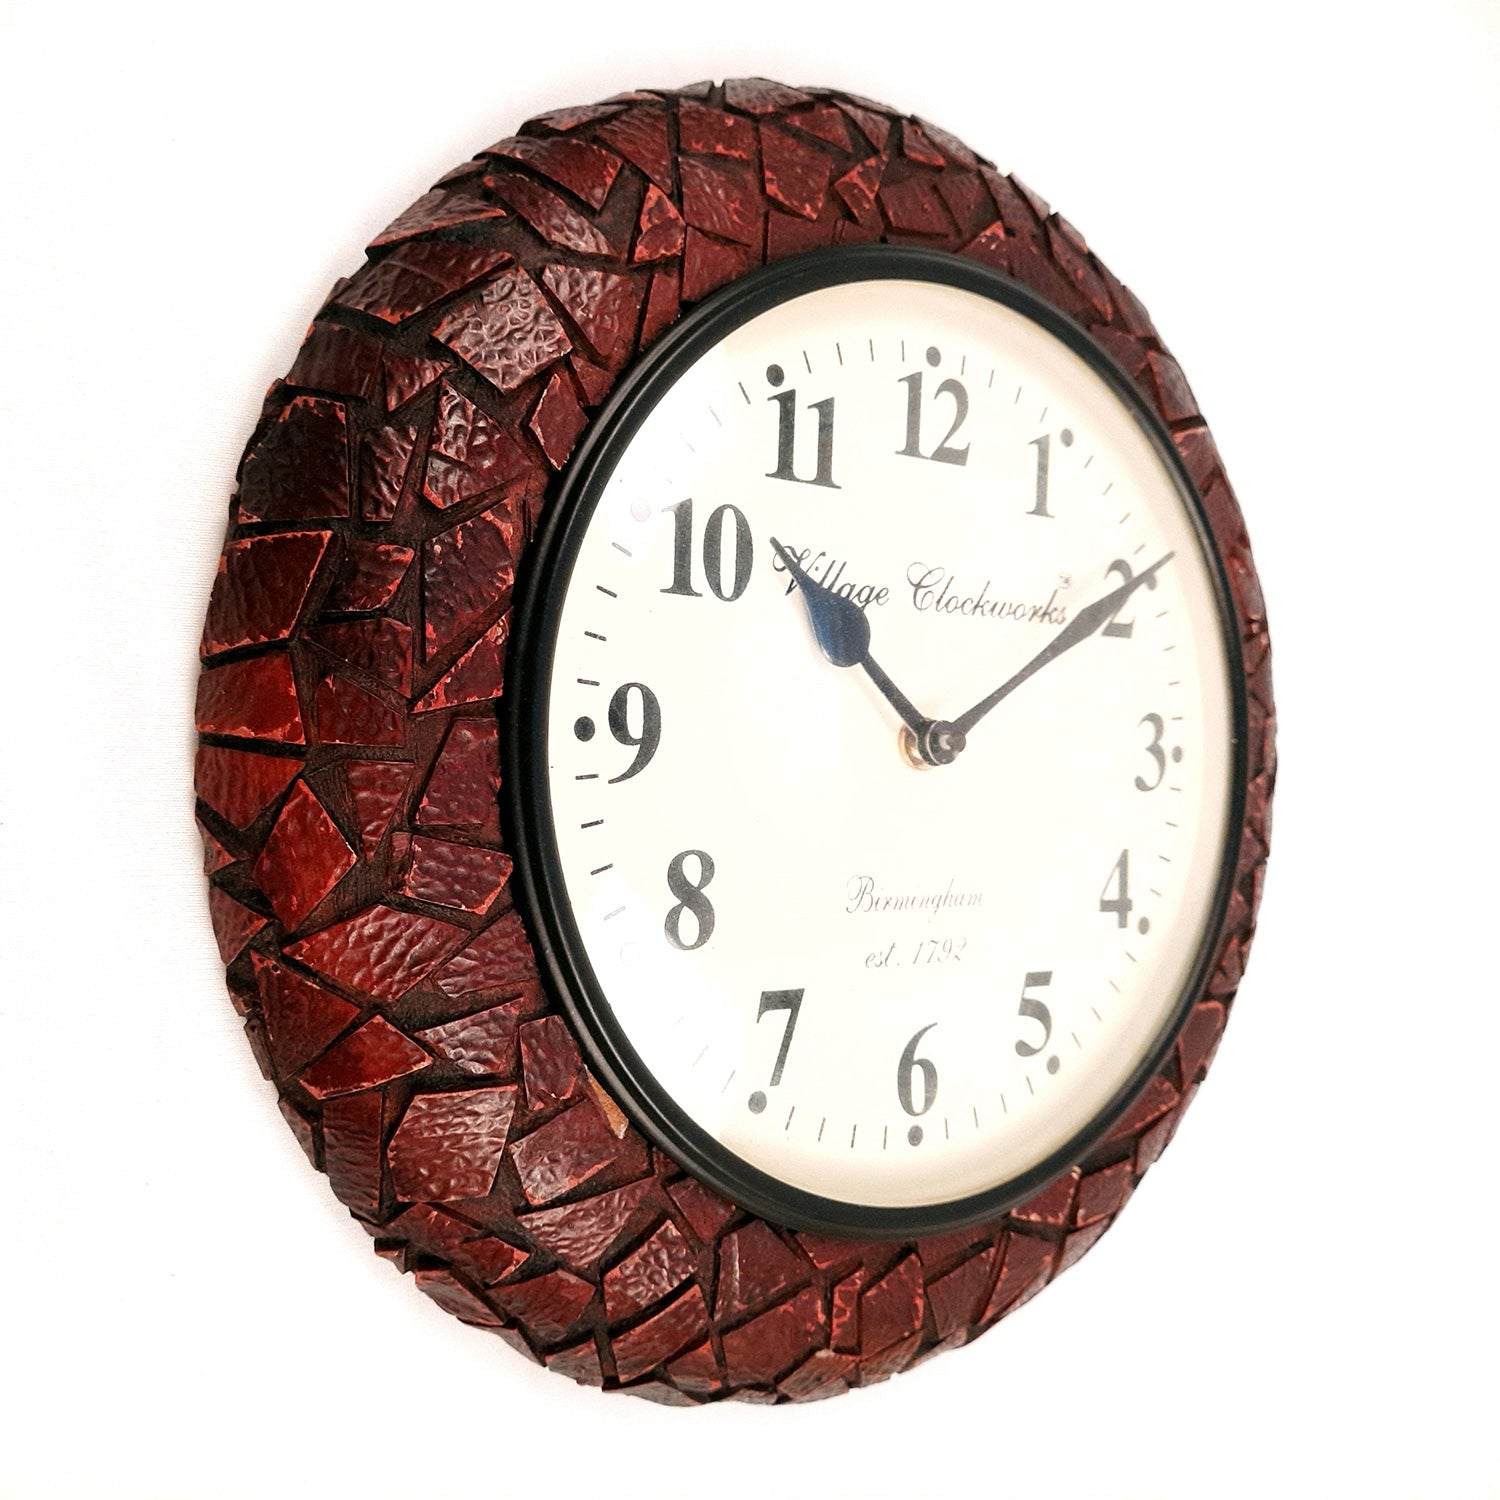 Happy Anniversary Personalized Wooden Wall Clock: Gift/Send Home Gifts  Online J11148955 |IGP.com